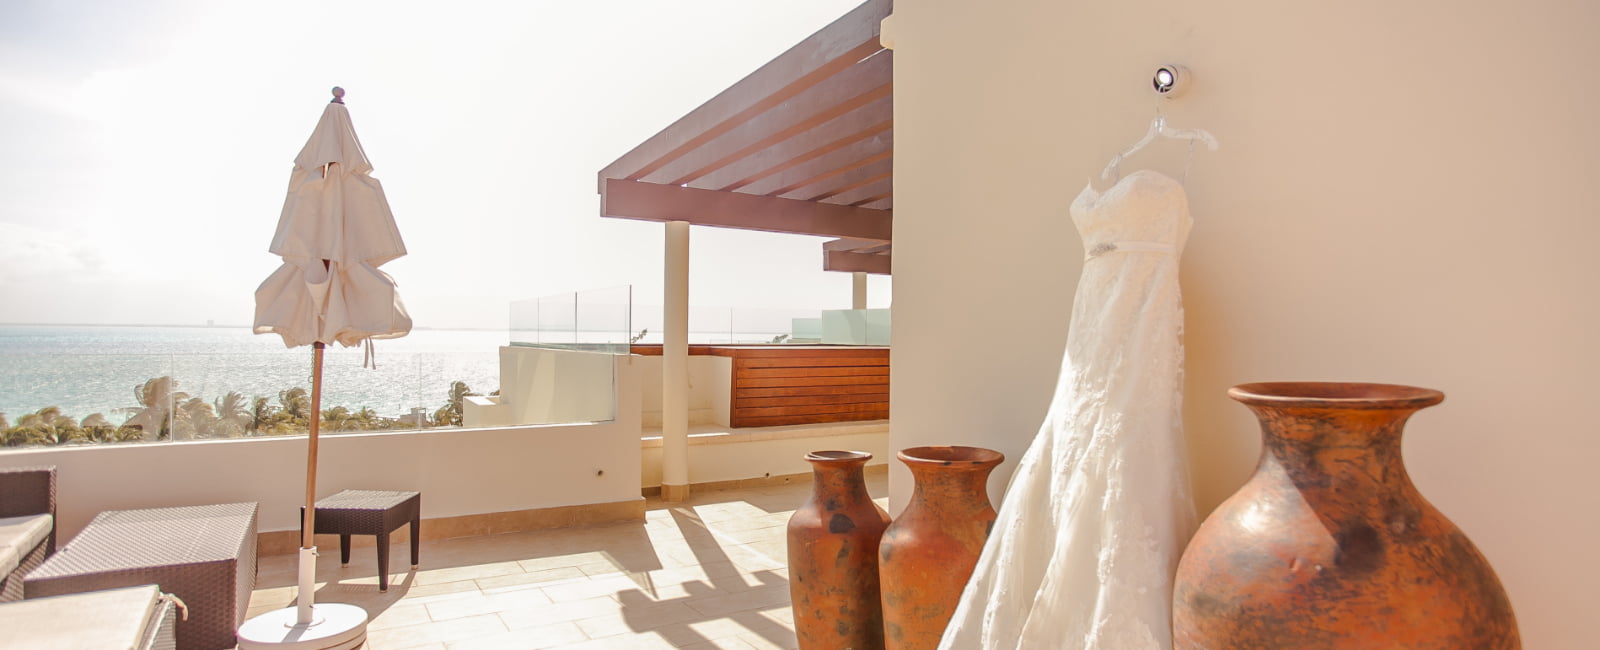 Terrace Suite with wedding dress